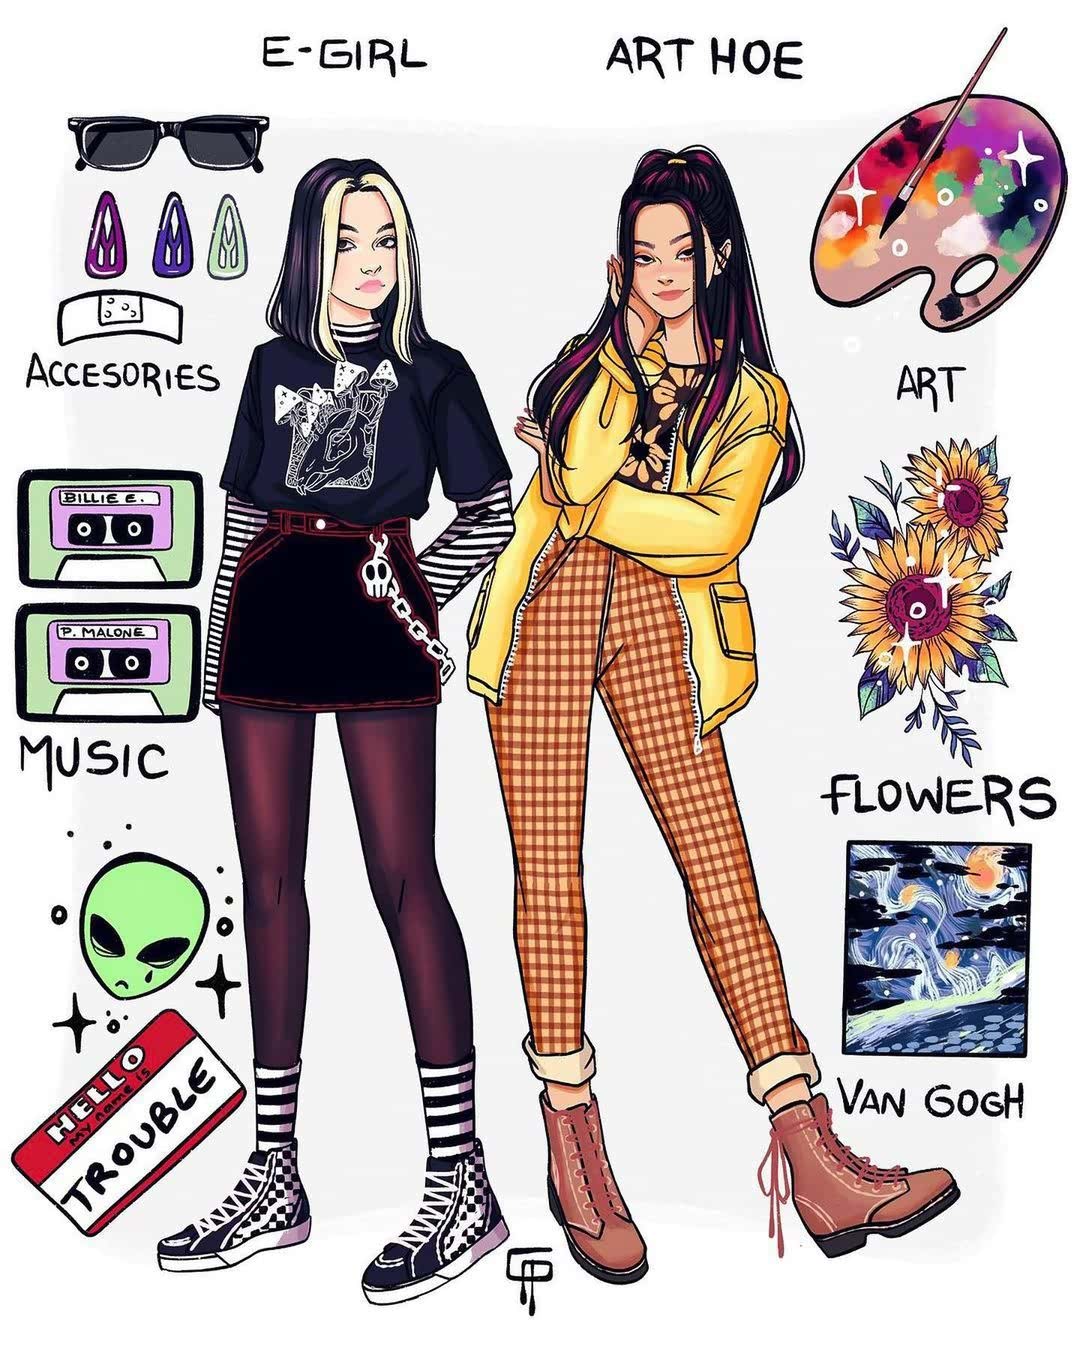 e girl and art hoe Top 20 Fashion Trends to Look Forward To for 2023